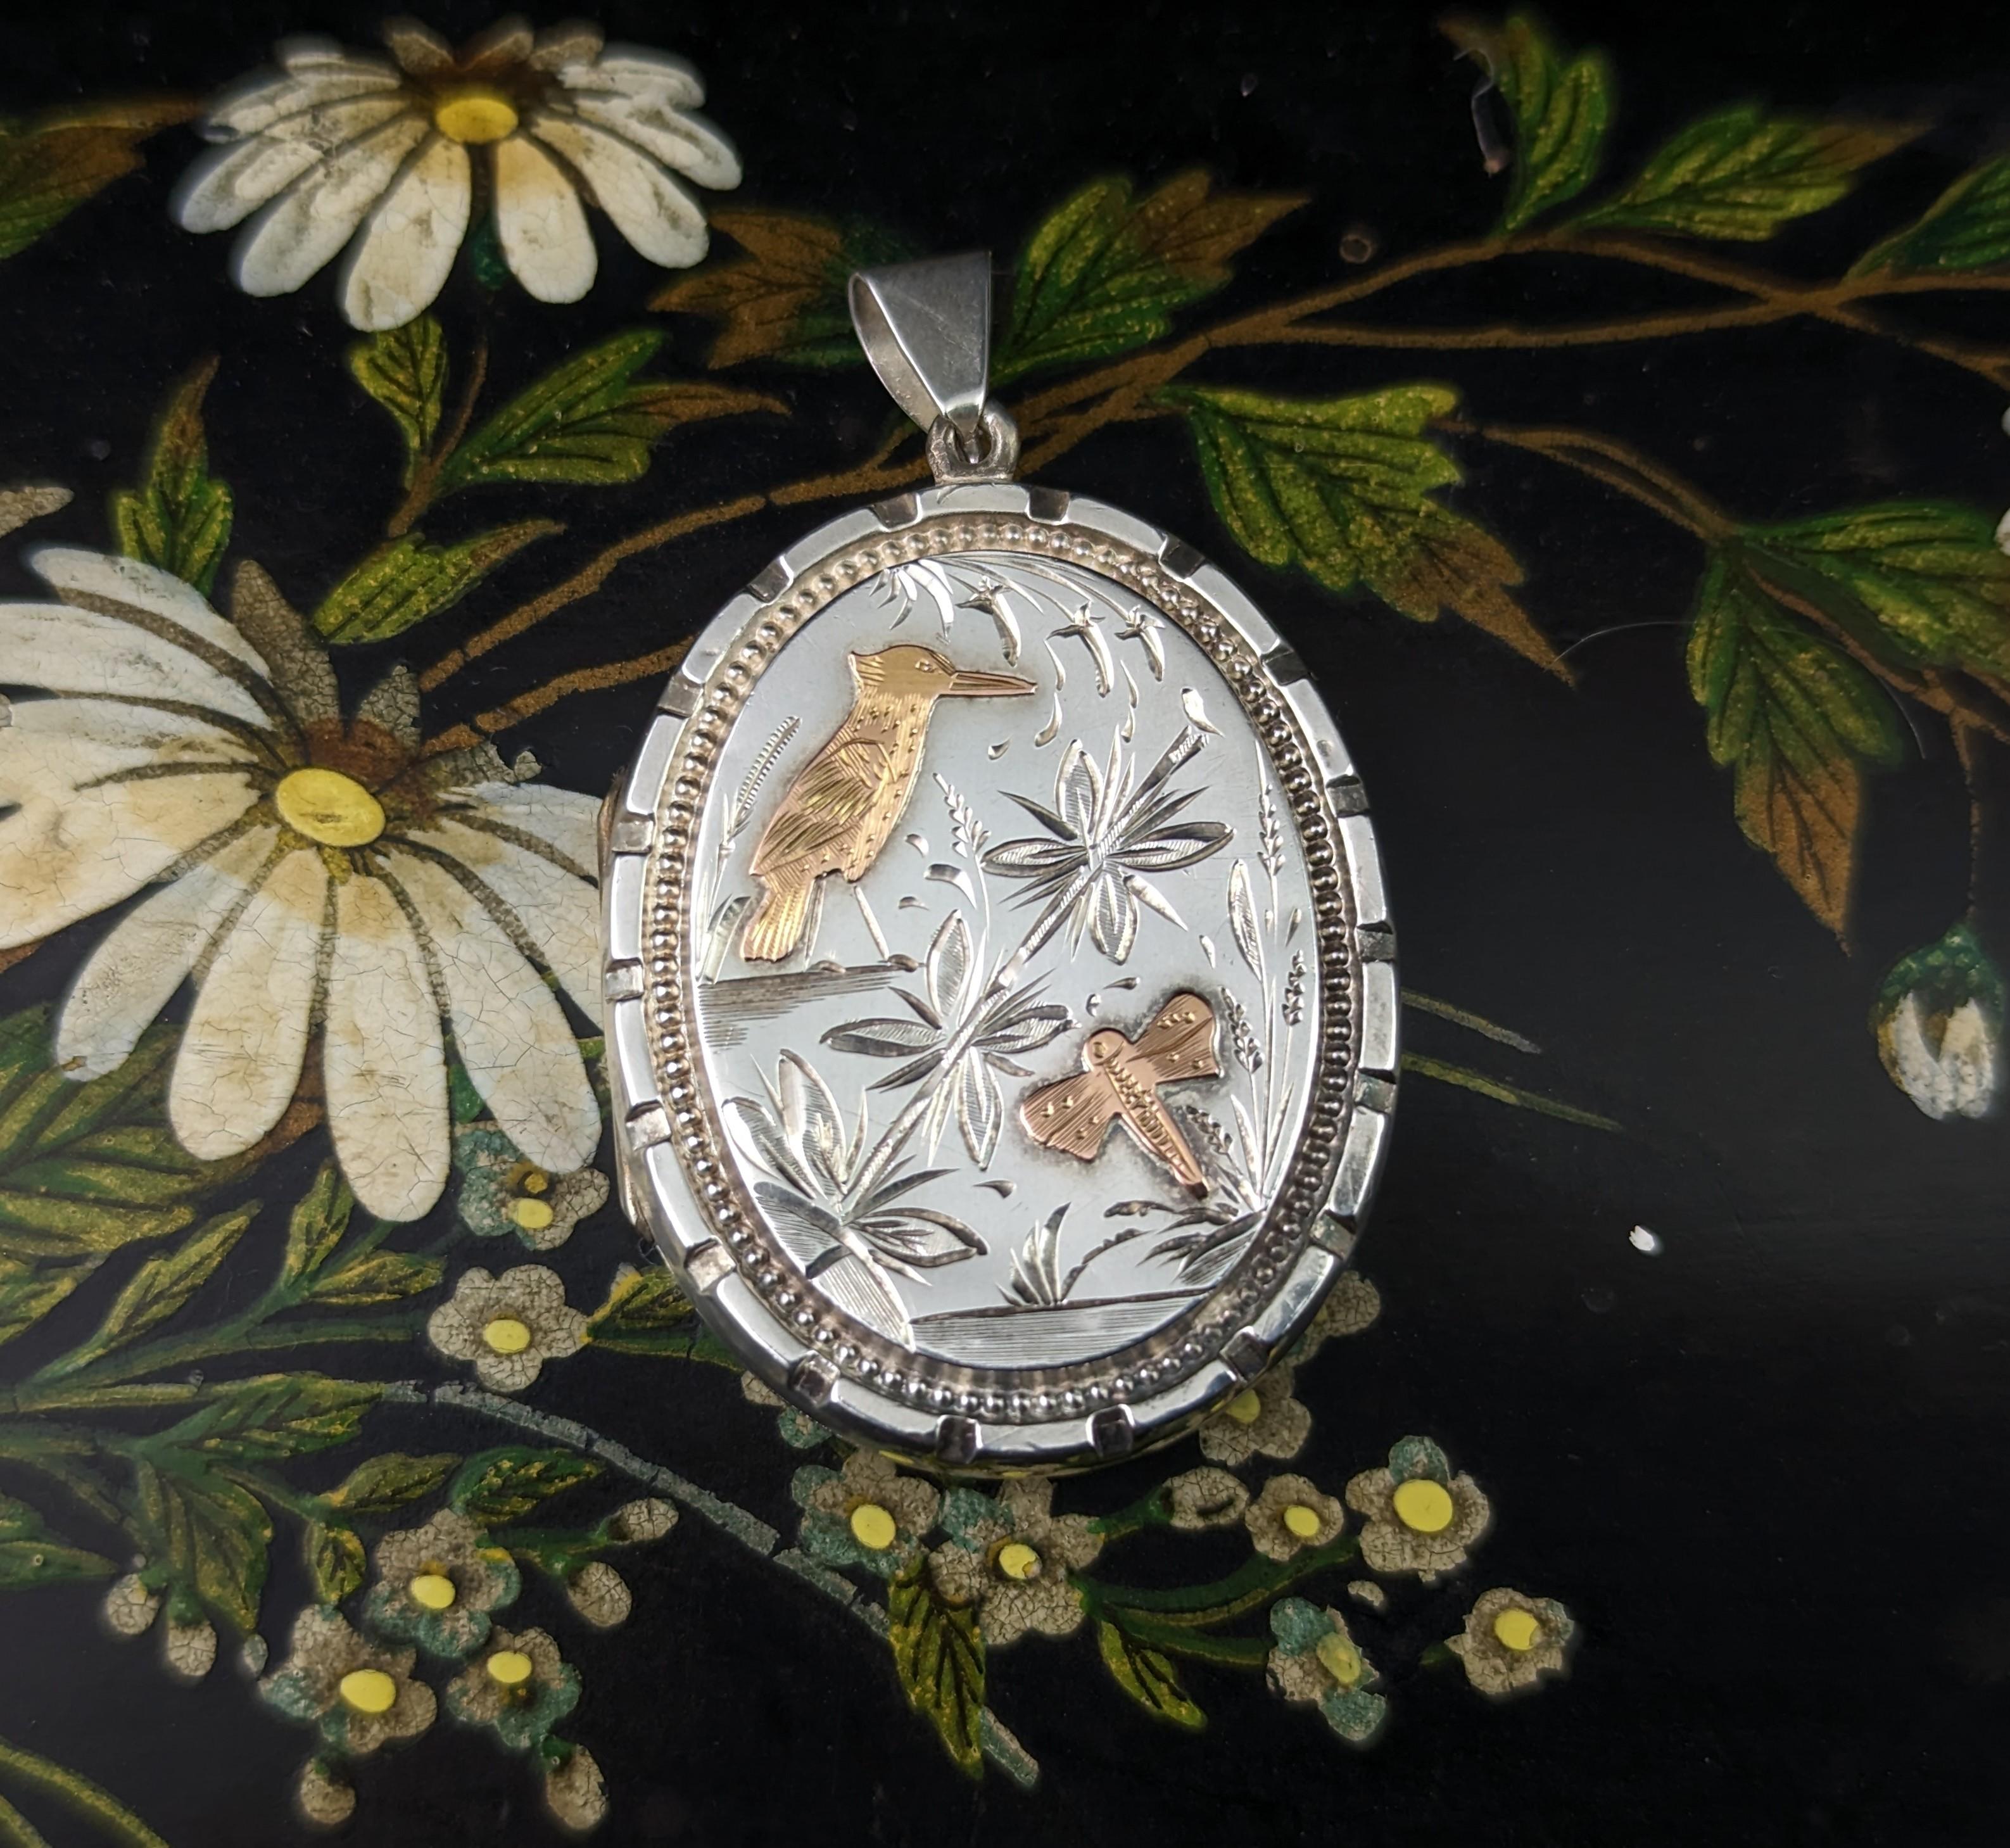 This antique, Victorian era Aesthetic silver locket is just beautiful!

This is an unusual example with a very pretty and detailed design, on one side it has an engraved image of a Kingfisher bird and a dragonfly by the water with applied 9kt